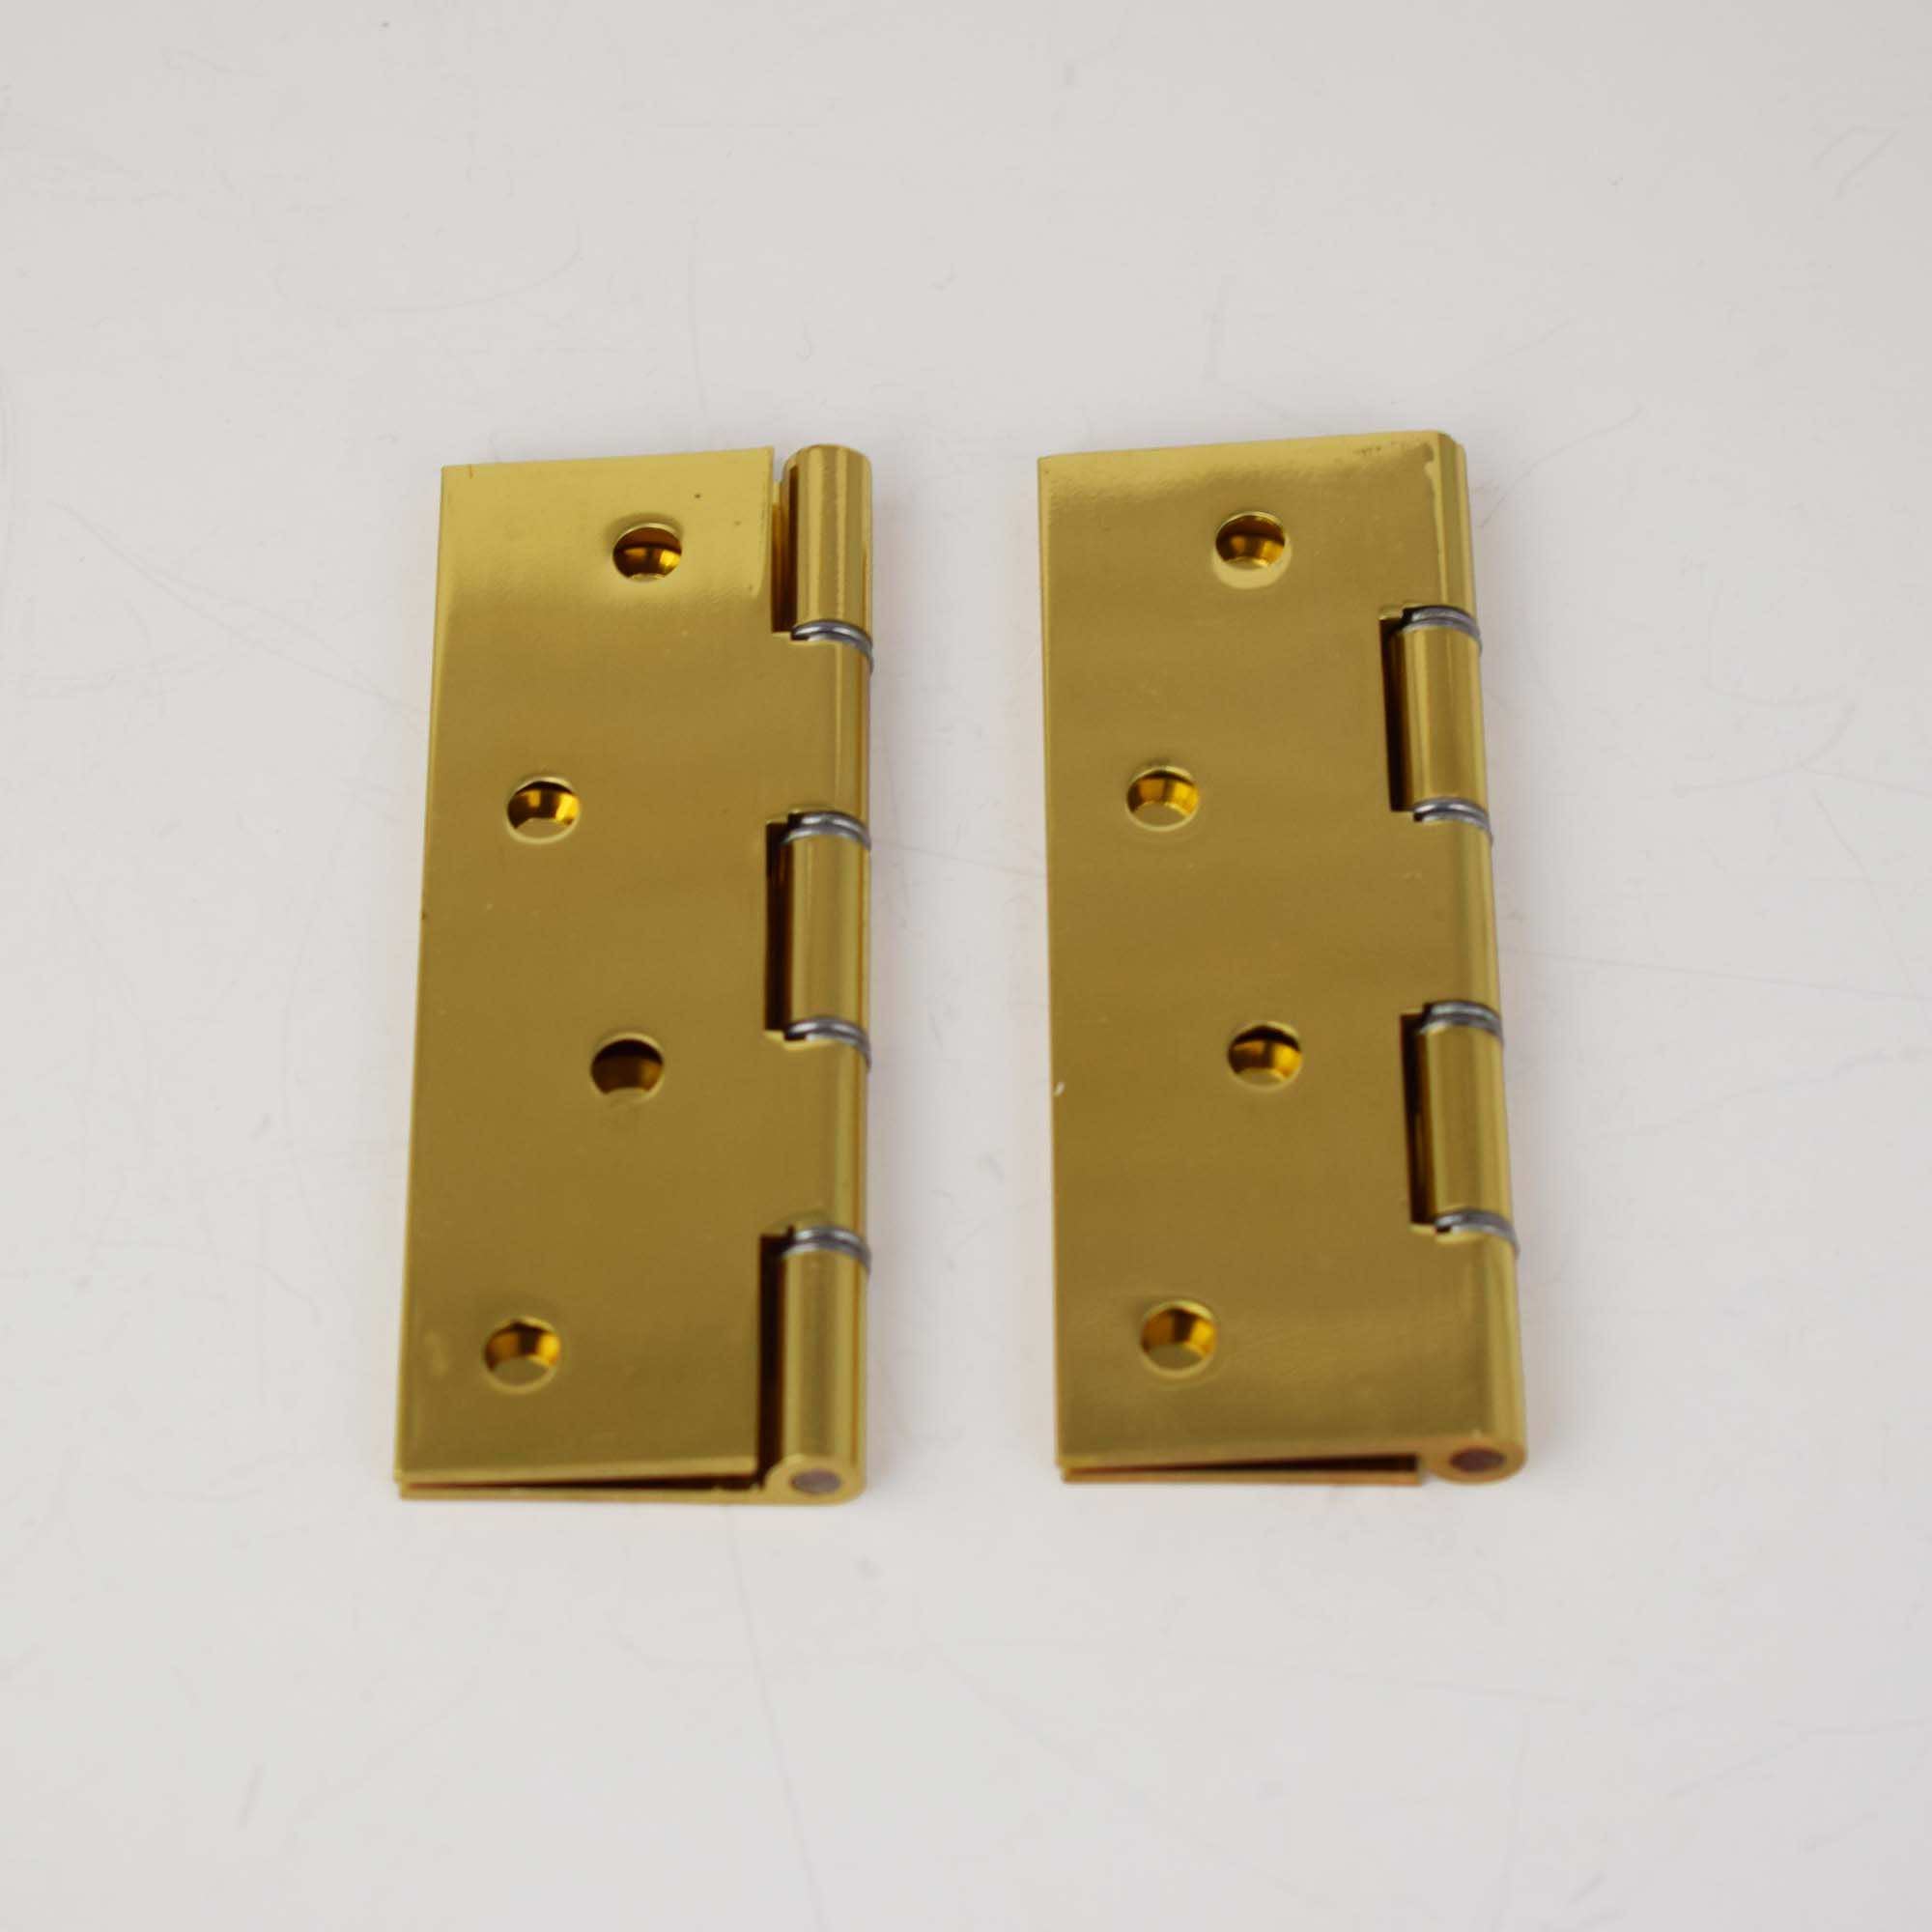 Brass polished hinges - closed